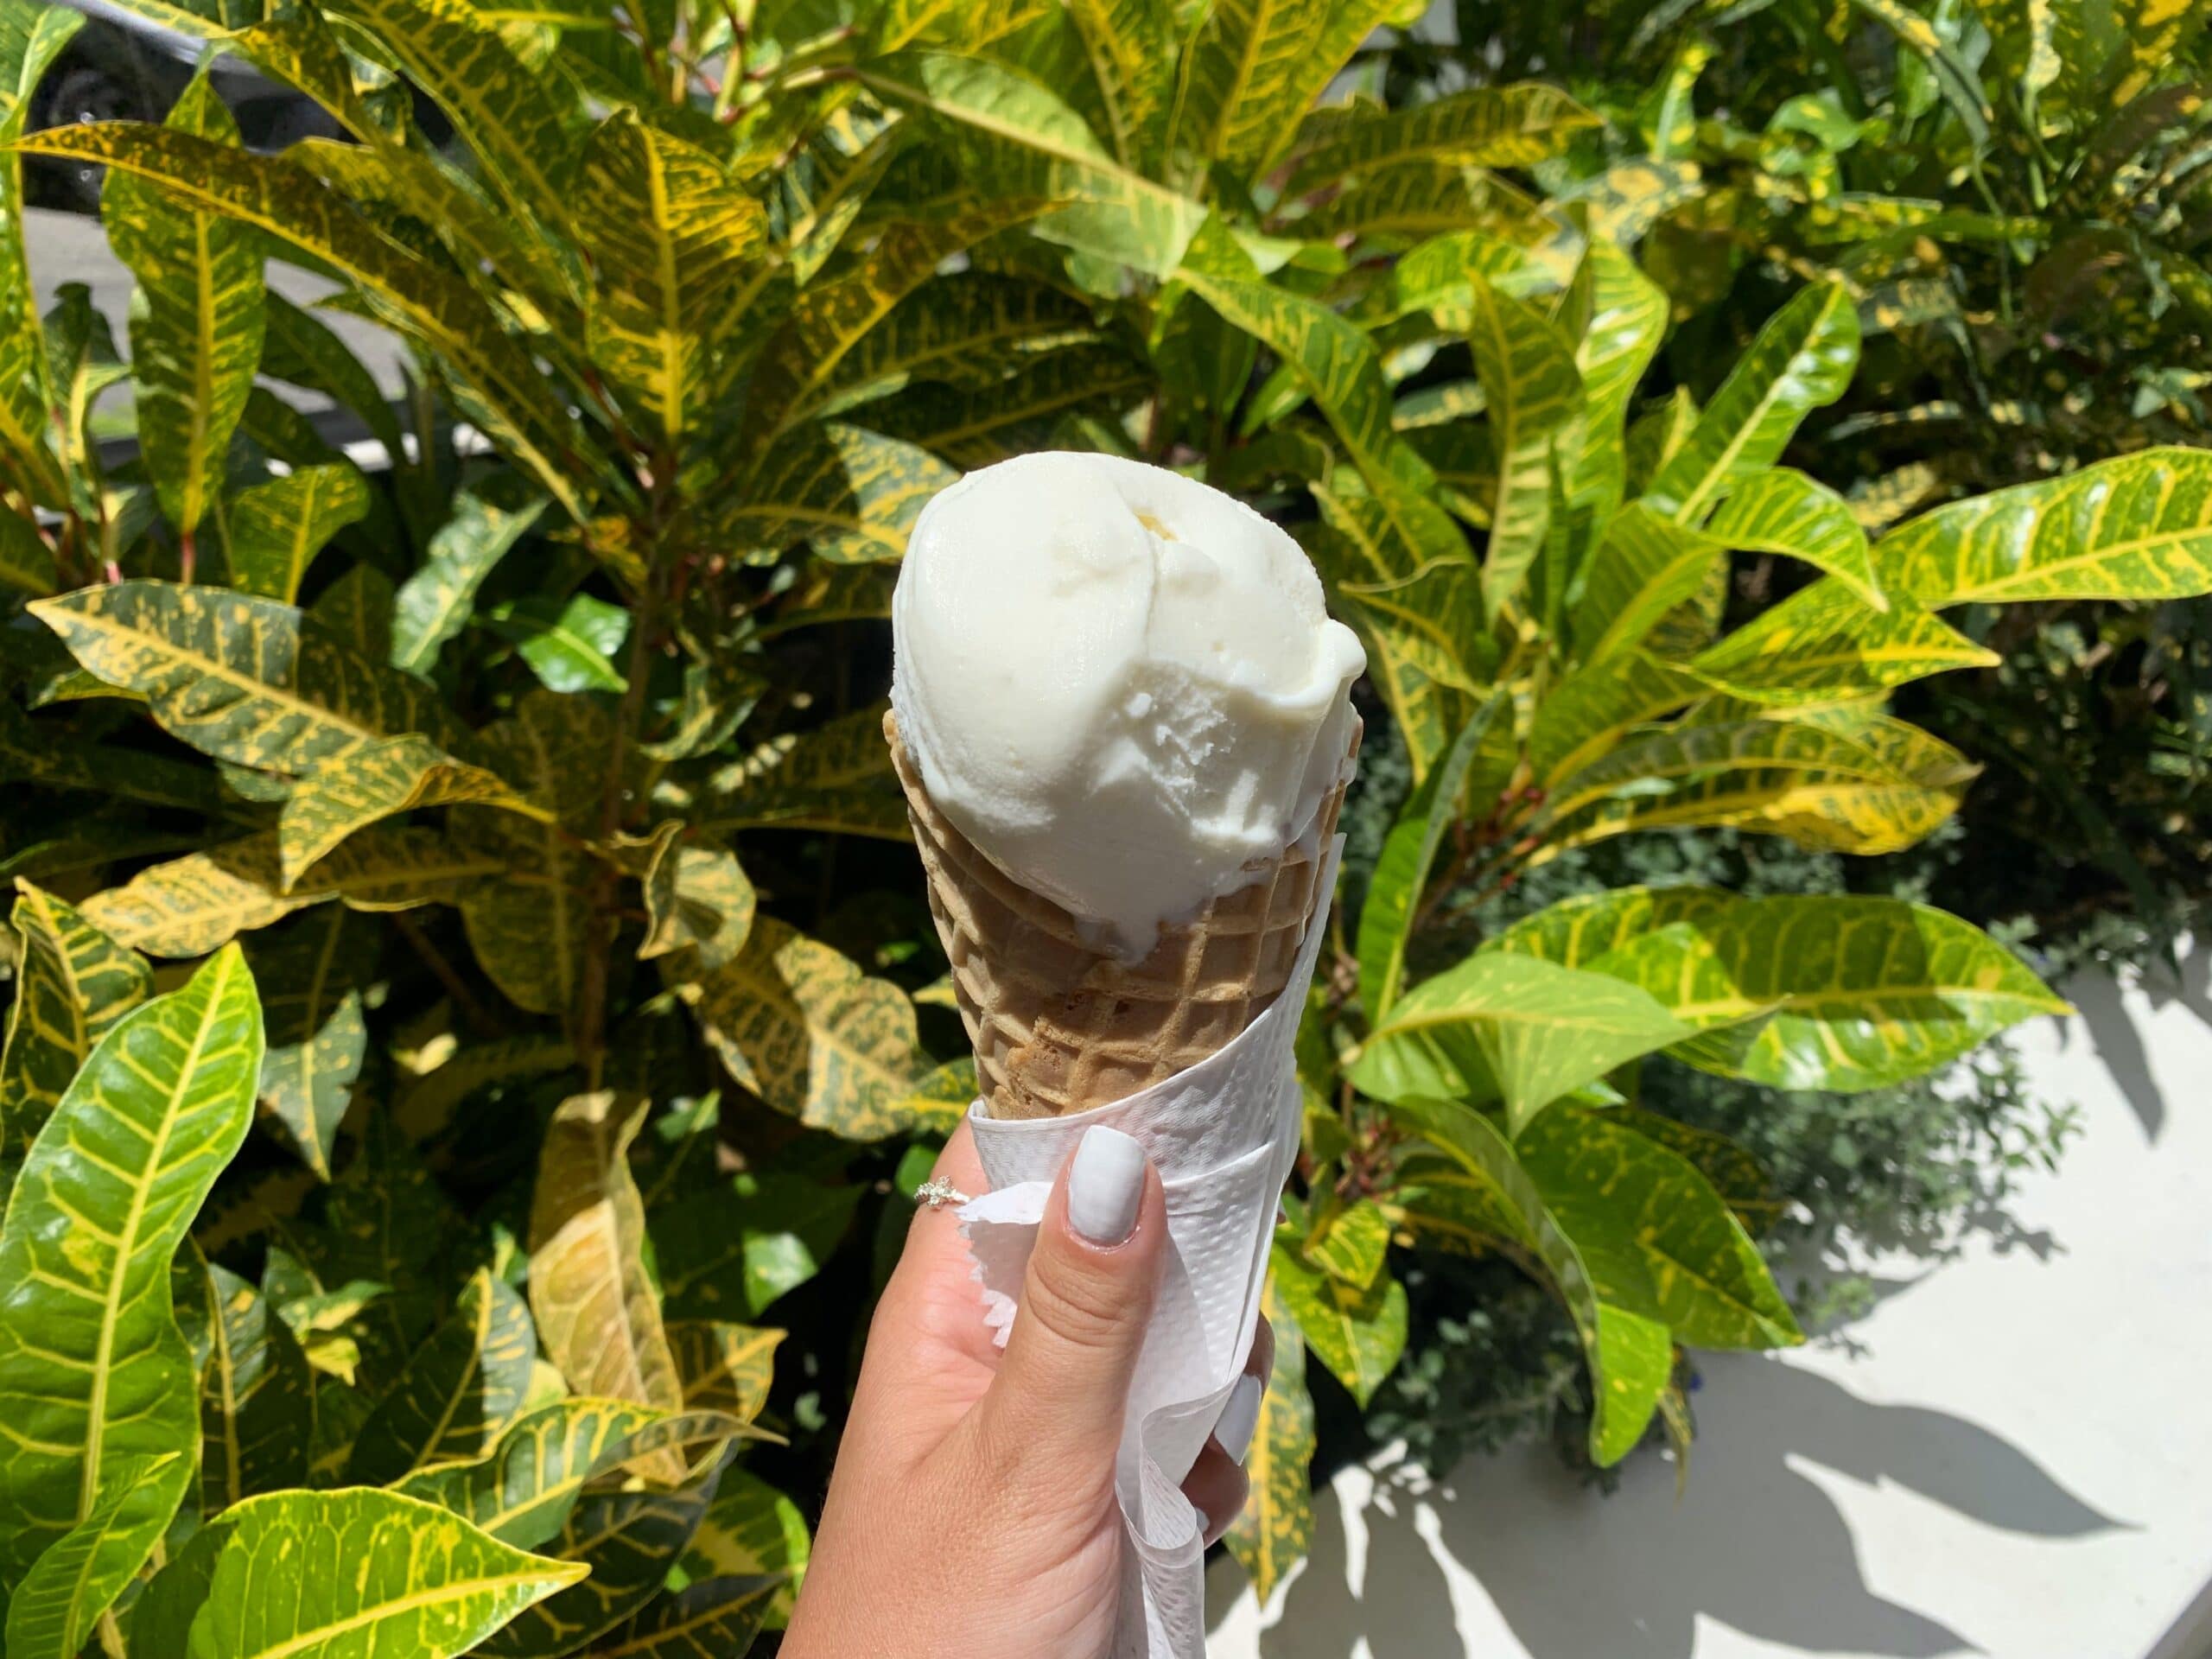 Celebrate National Ice Cream Month and Day on the Selmon Greenway